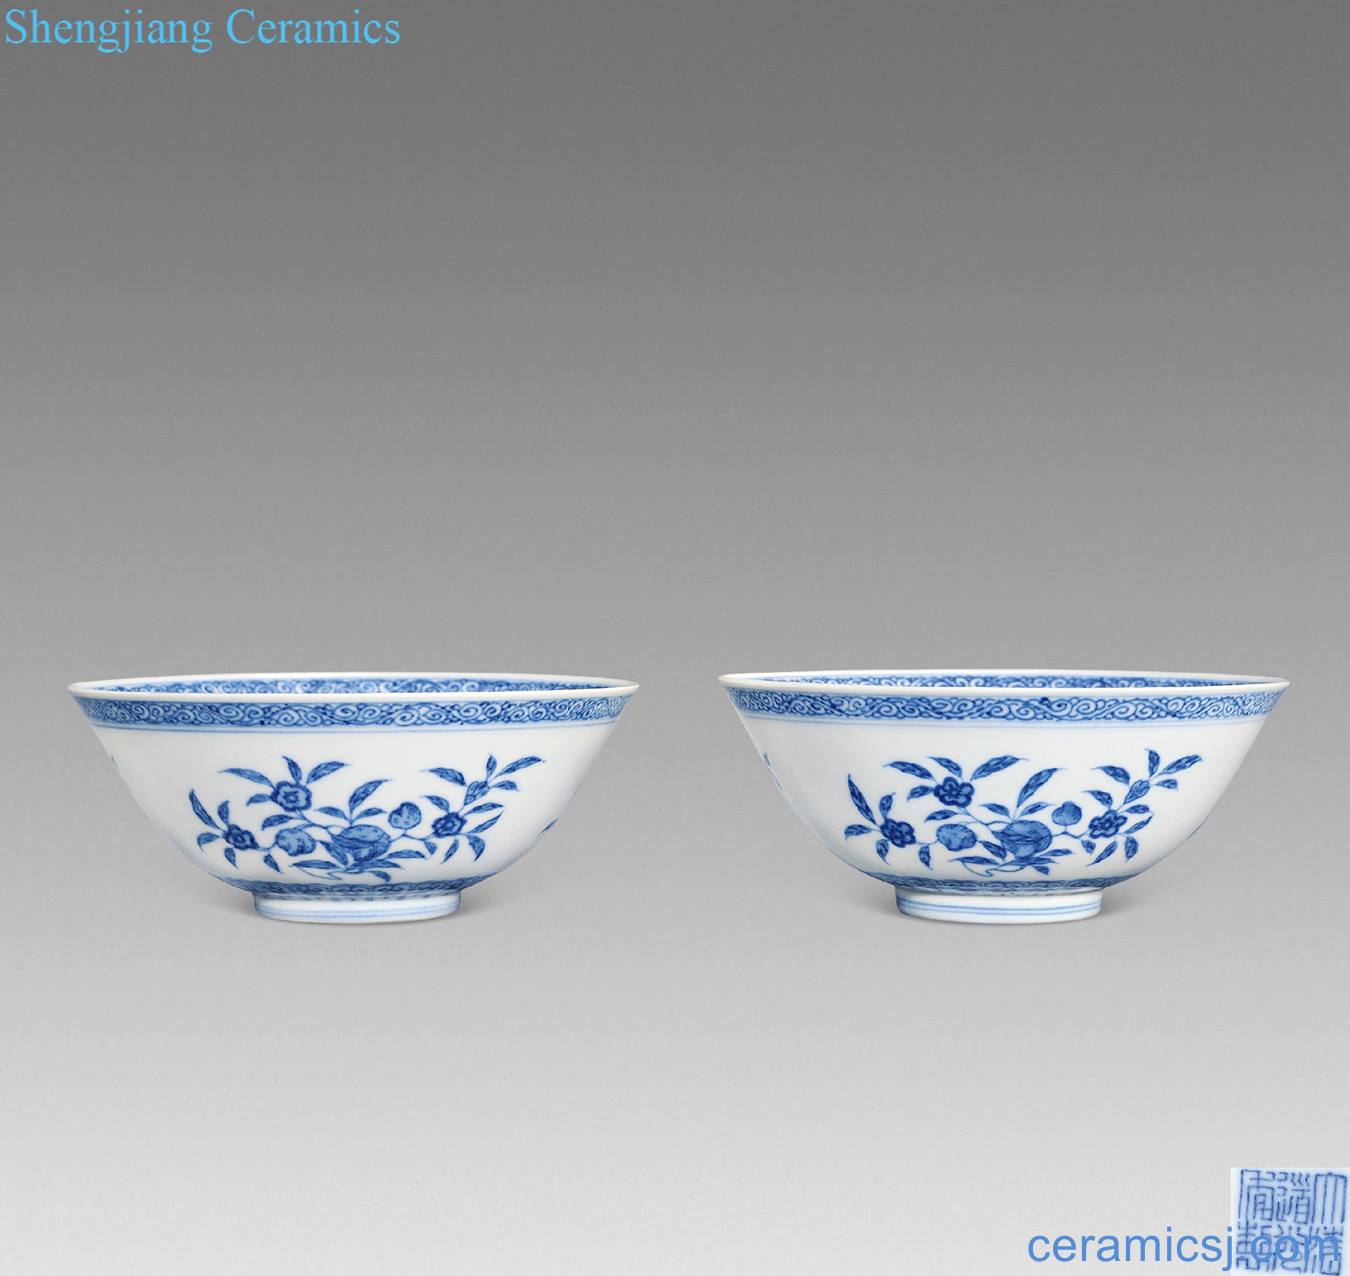 Qing daoguang Blue and white folding branches sanduo bowl (a)